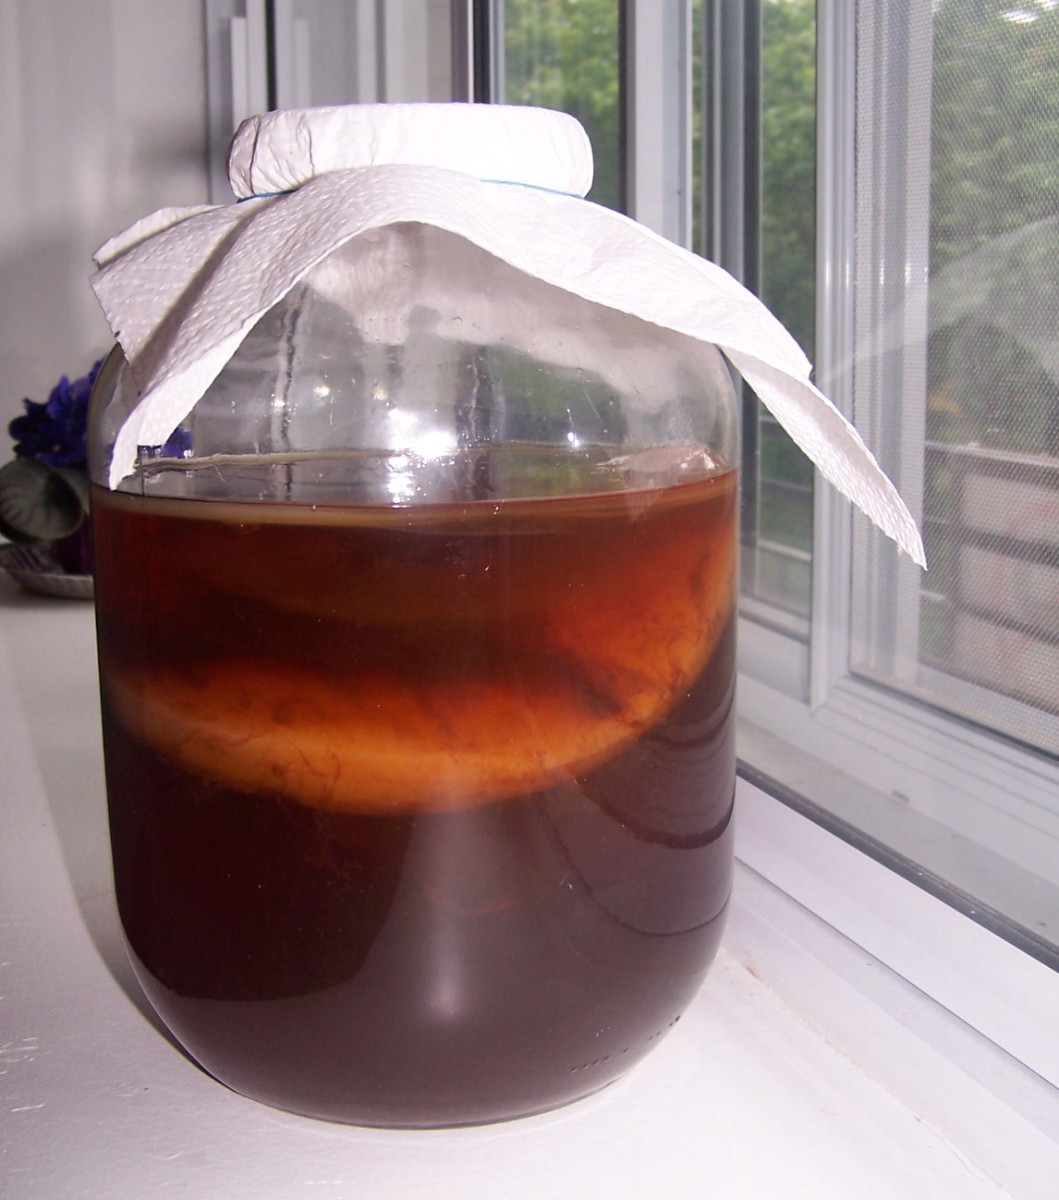 Kombucha culture with SCOBY